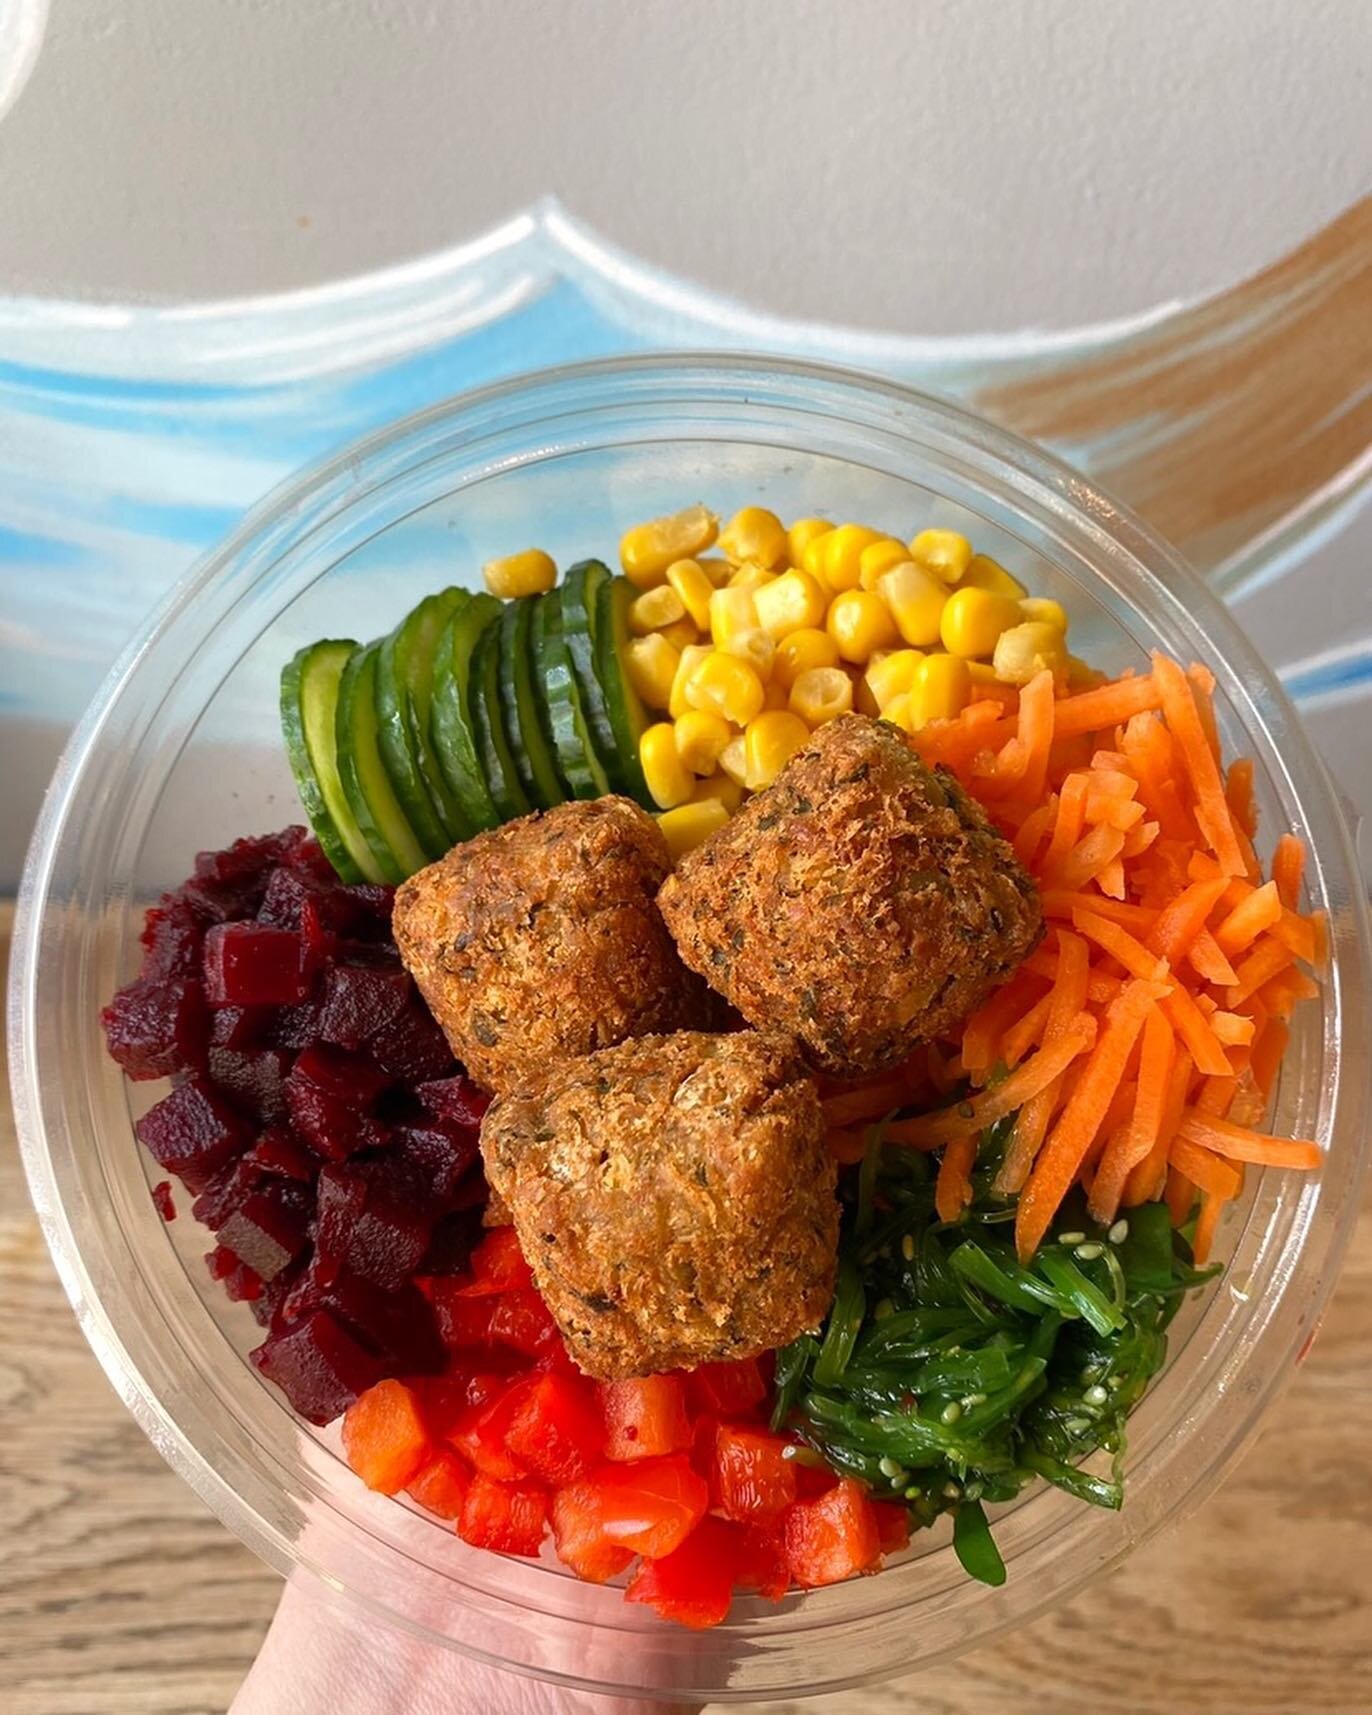 Have you tried our rainbow falafel bowl??
~You can make your own Falafel bowl choosing your base, mix ins, toppings and flavor 🌈😍 

#falafel #pokebowl #vegan #veganfriendly #colorfulfood #healtyfood #thebowlandrollpoke #teddingtonhighstreet #ramen 